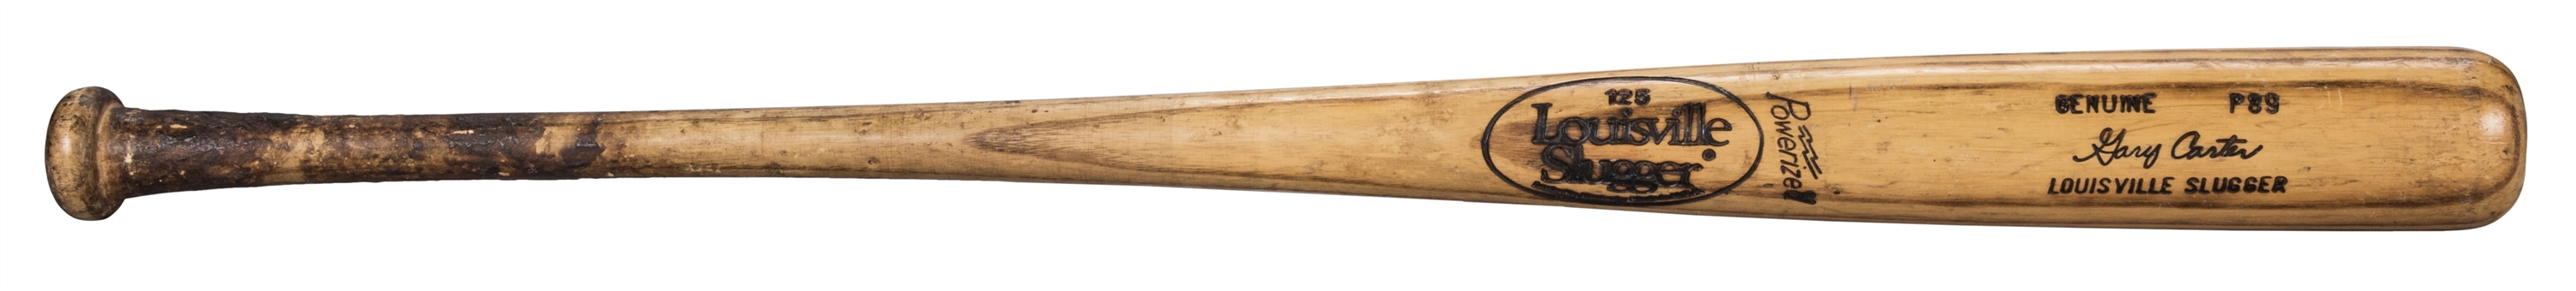 1983-85 Gary Carter Game Used Louisville Slugger P89 Model Bat (MEARS A-9.5)